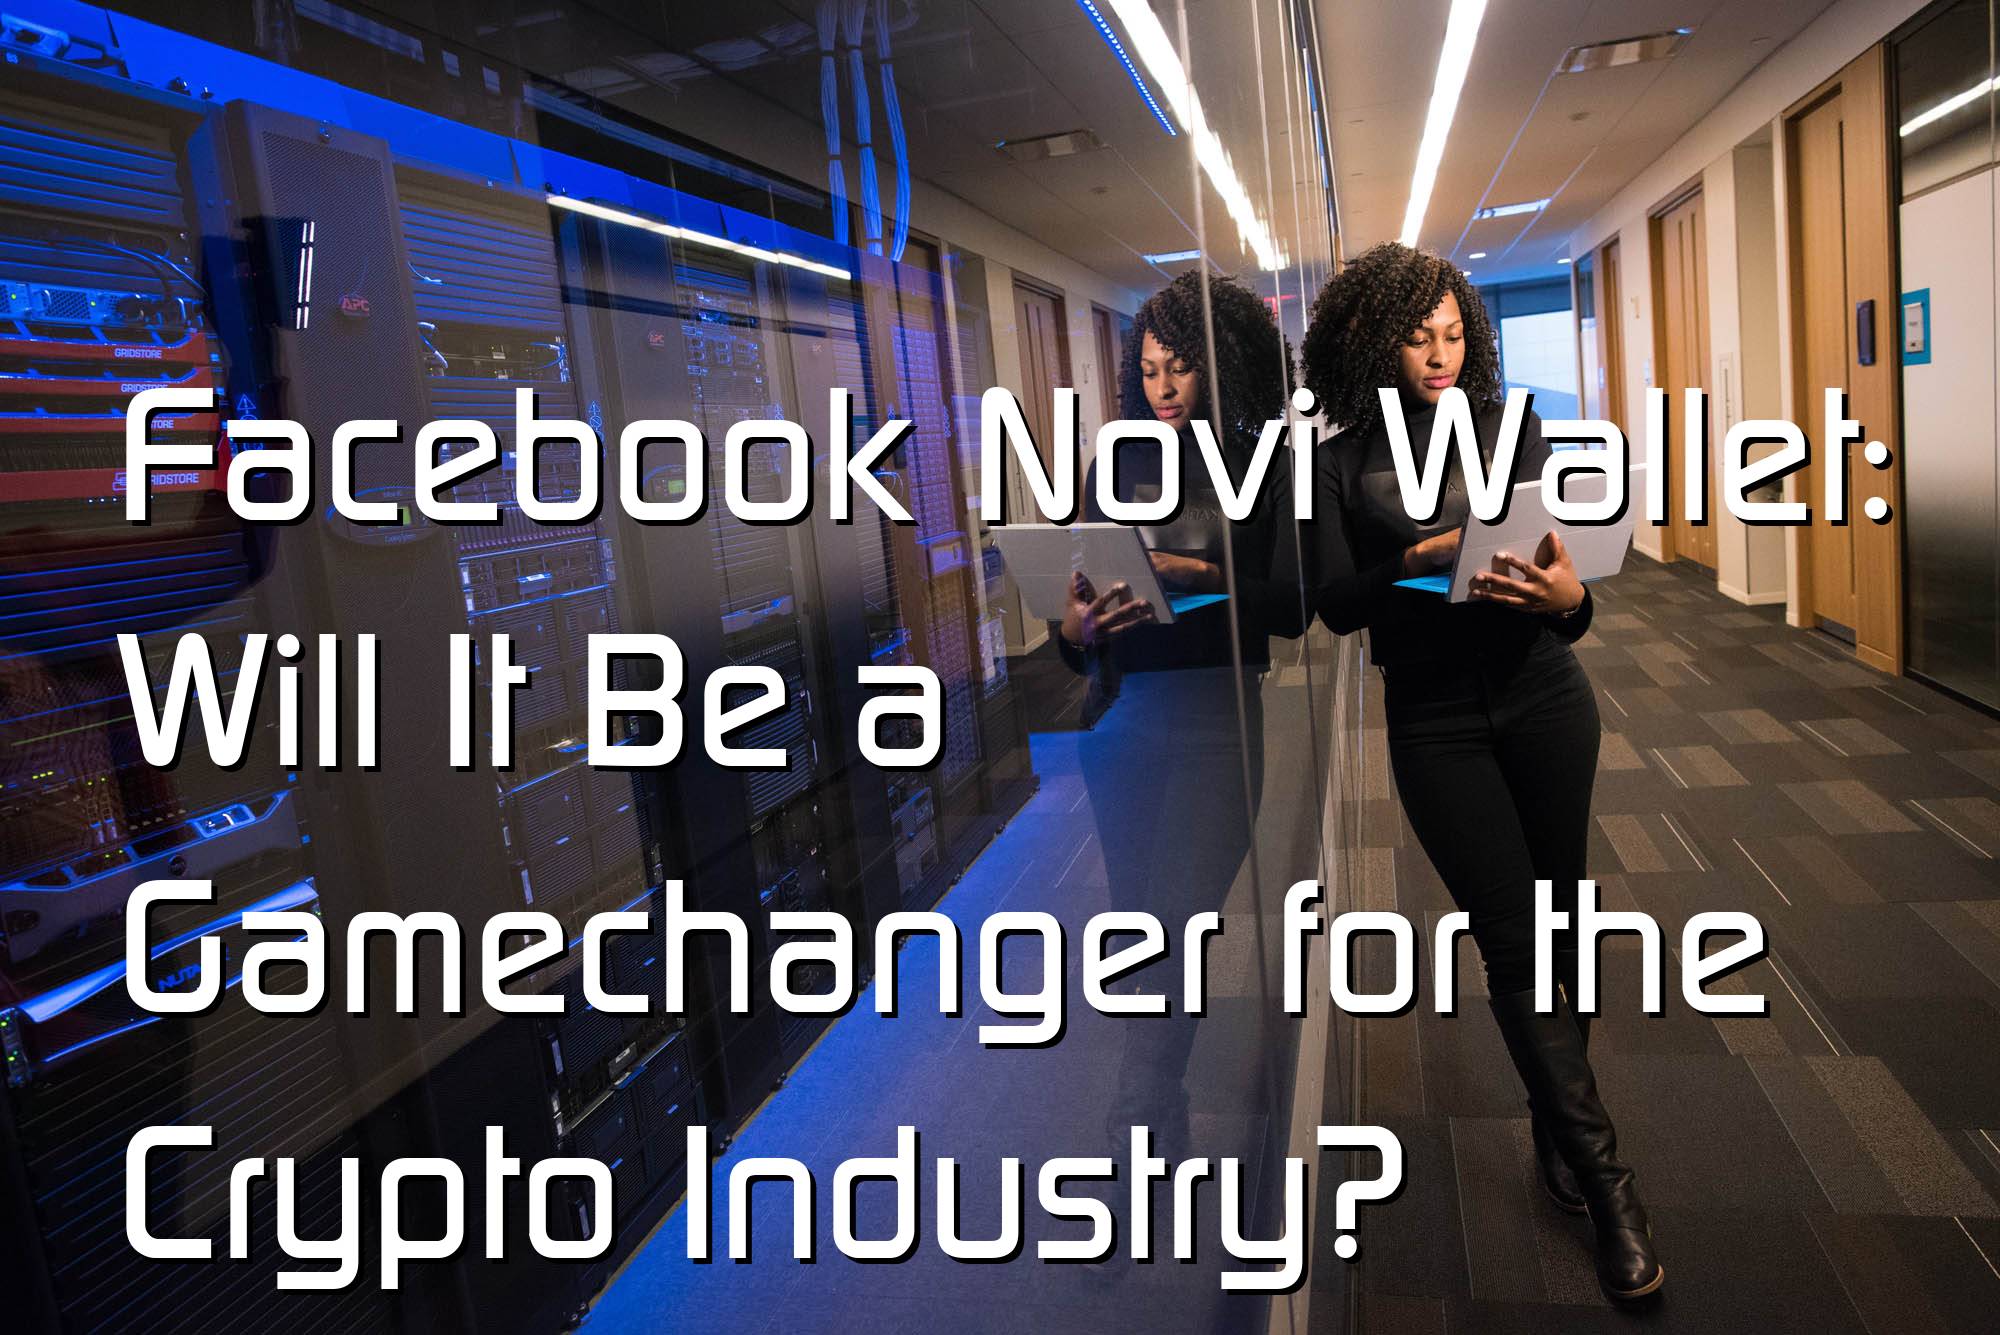 @$61167.15 Facebook Novi Wallet: Will It Be a Gamechanger for the Crypto Industry?